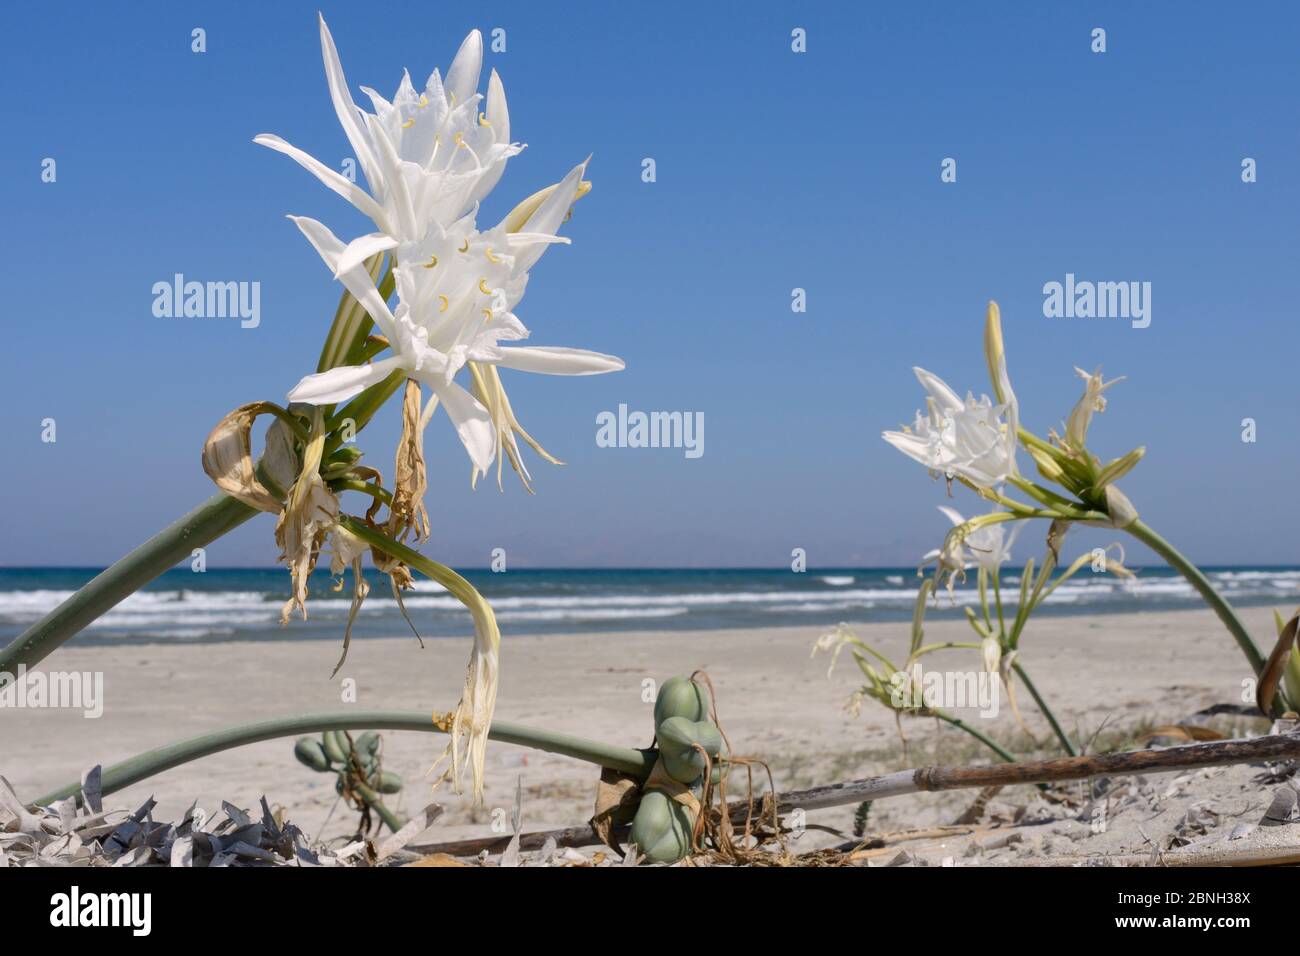 Sea daffodil / Sea lily (Pancratium maritimum) flowers and seed pods on sand dunes, Kos, Dodecanese islands, Greece, August 2013. Stock Photo